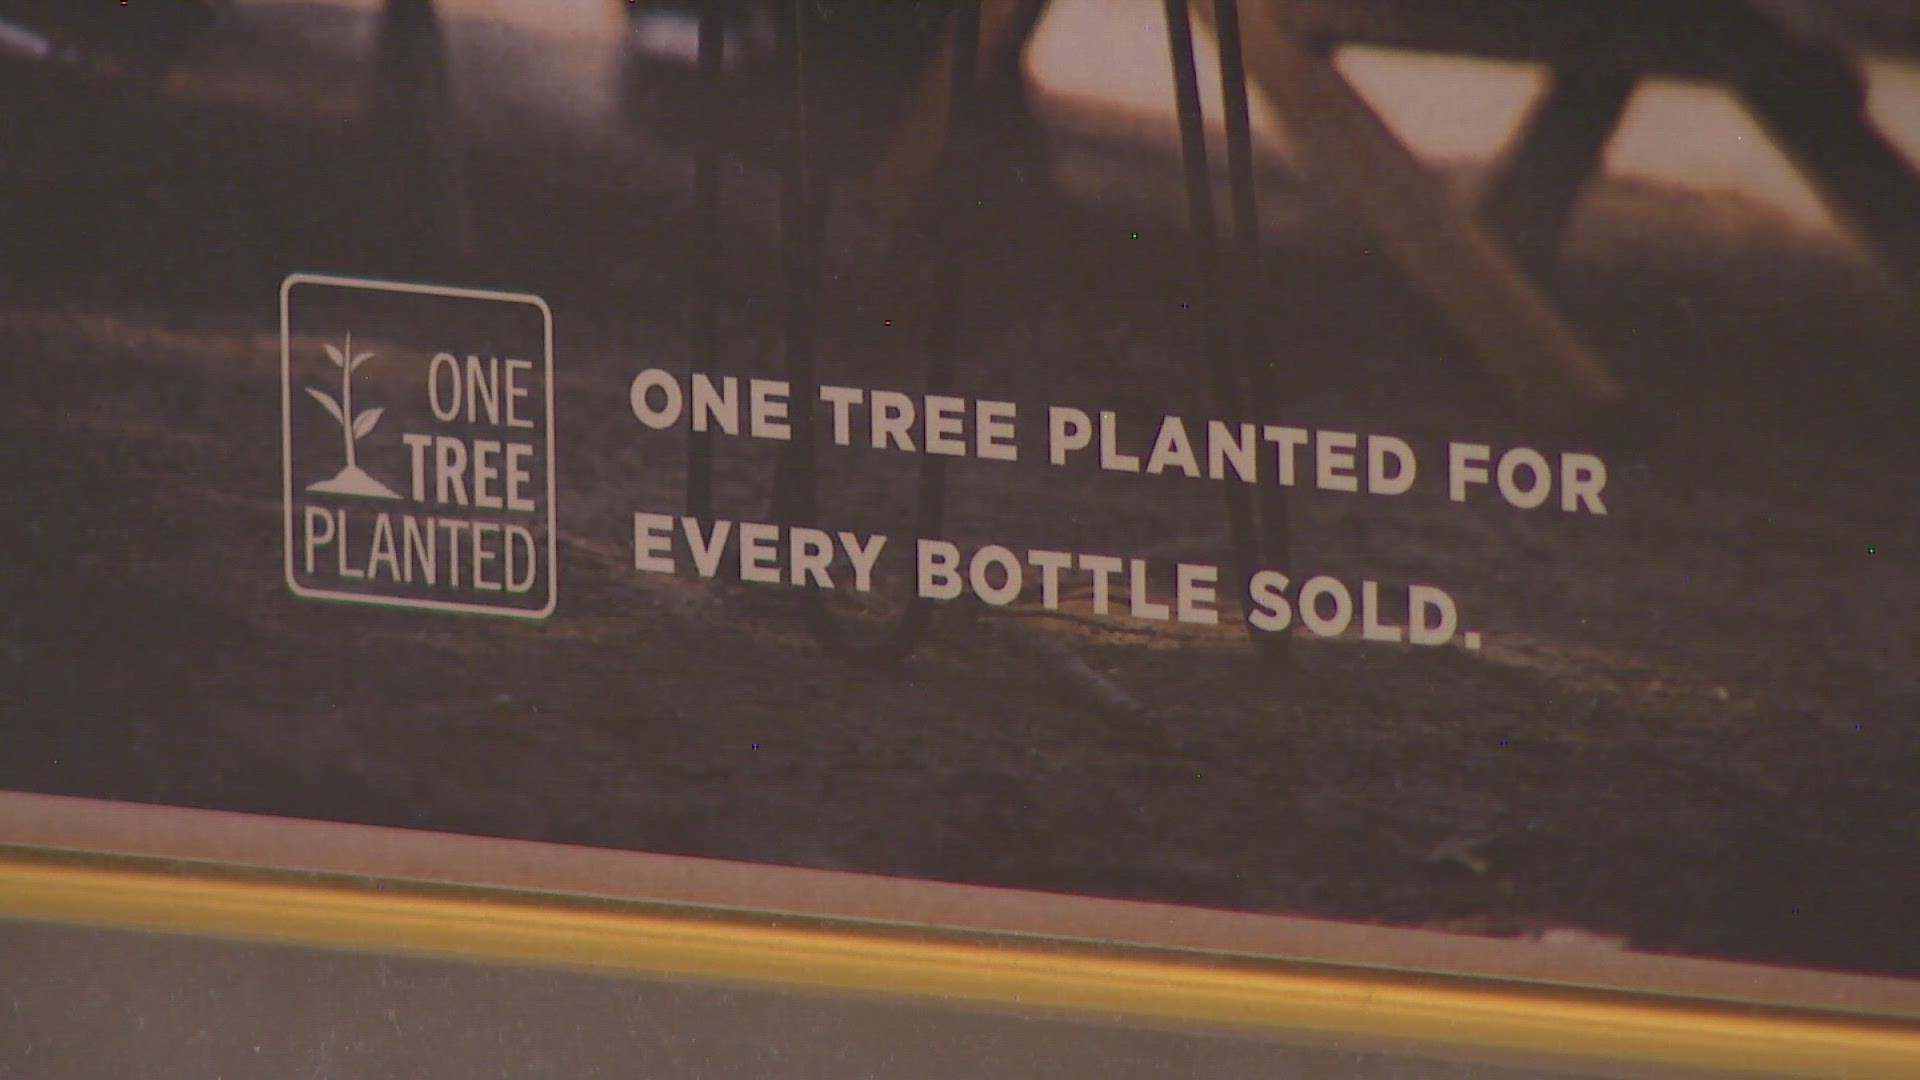 Browne Family Vineyards hopes to make an impact with very bottle of wine it sells.